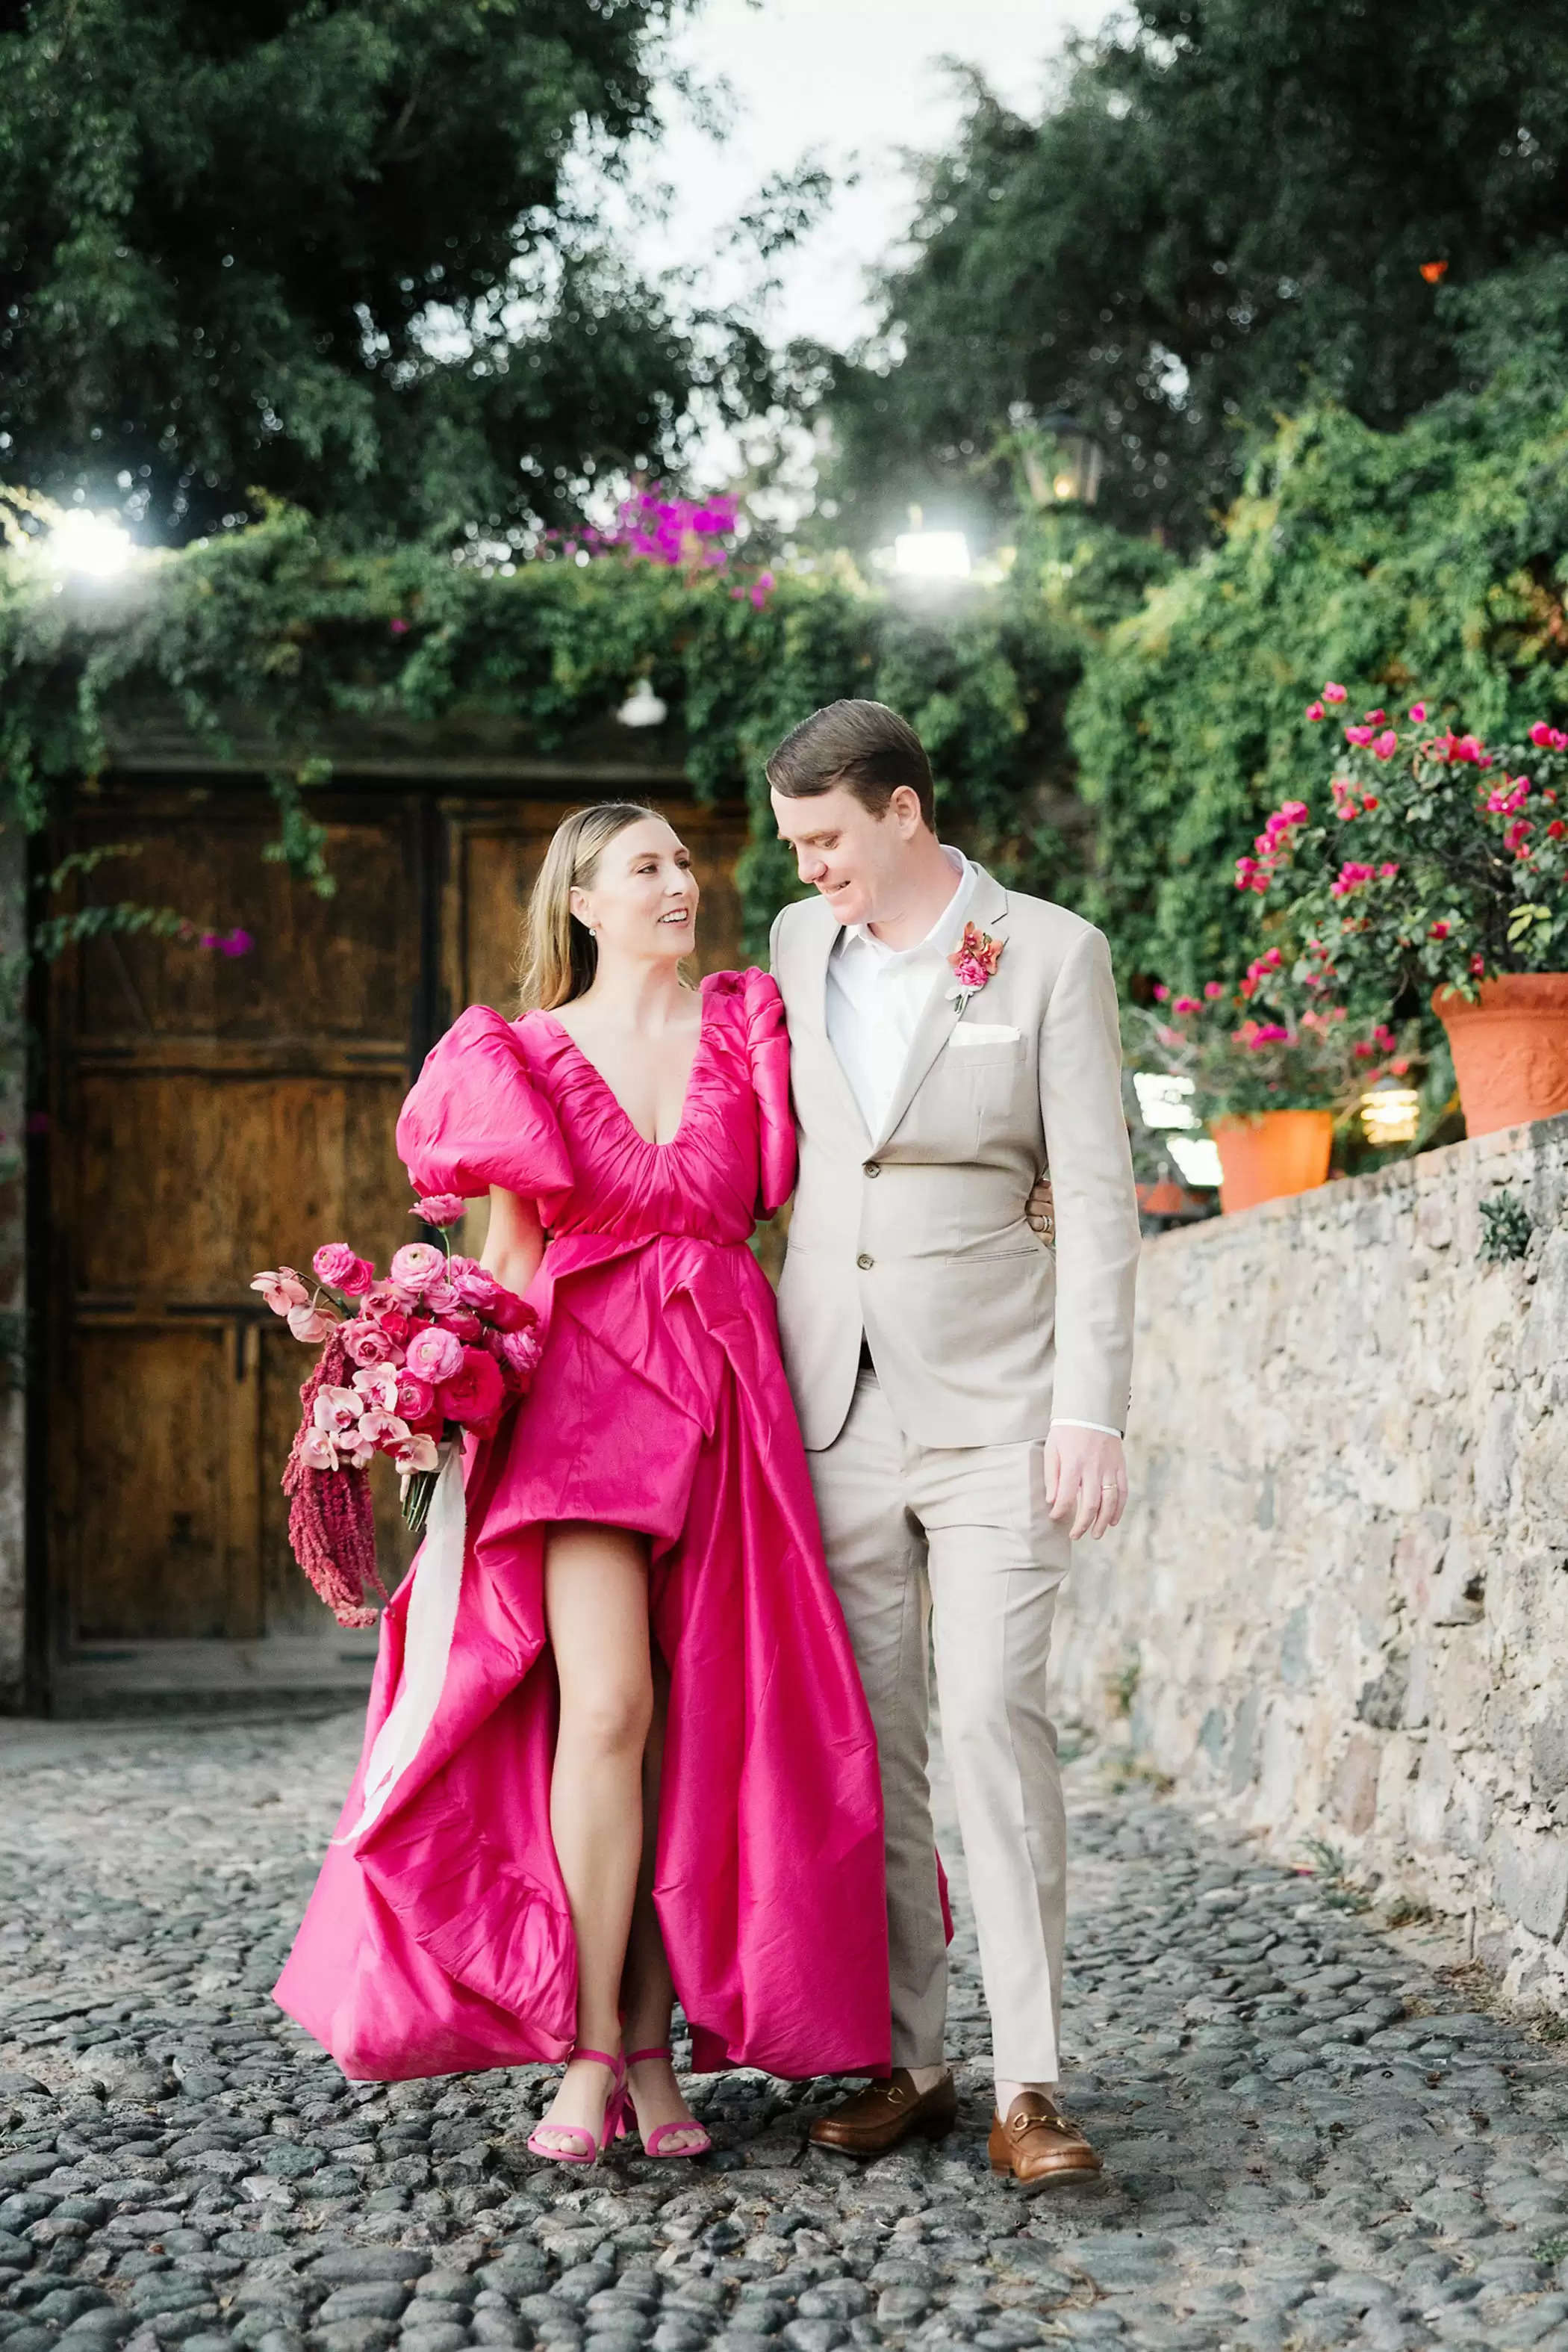 The Bride Wore Pink + the Visitors Wore White for This Placing Vacation spot Wedding ceremony in San Miguel de Allende